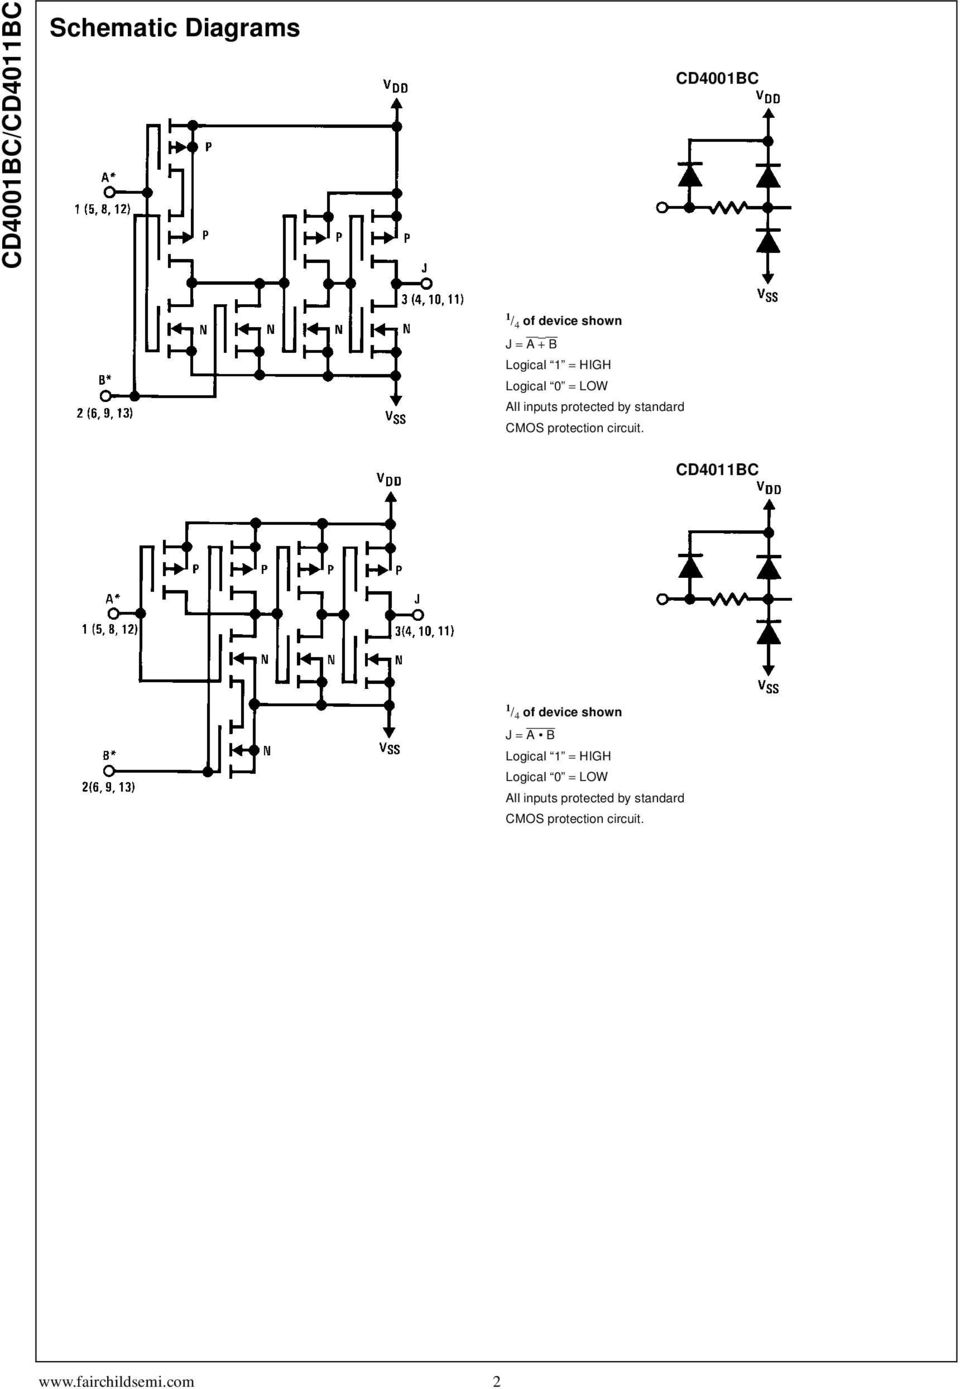 protection circuit. CD4011BC 1 / 4 of device shown J = A B  protection circuit.